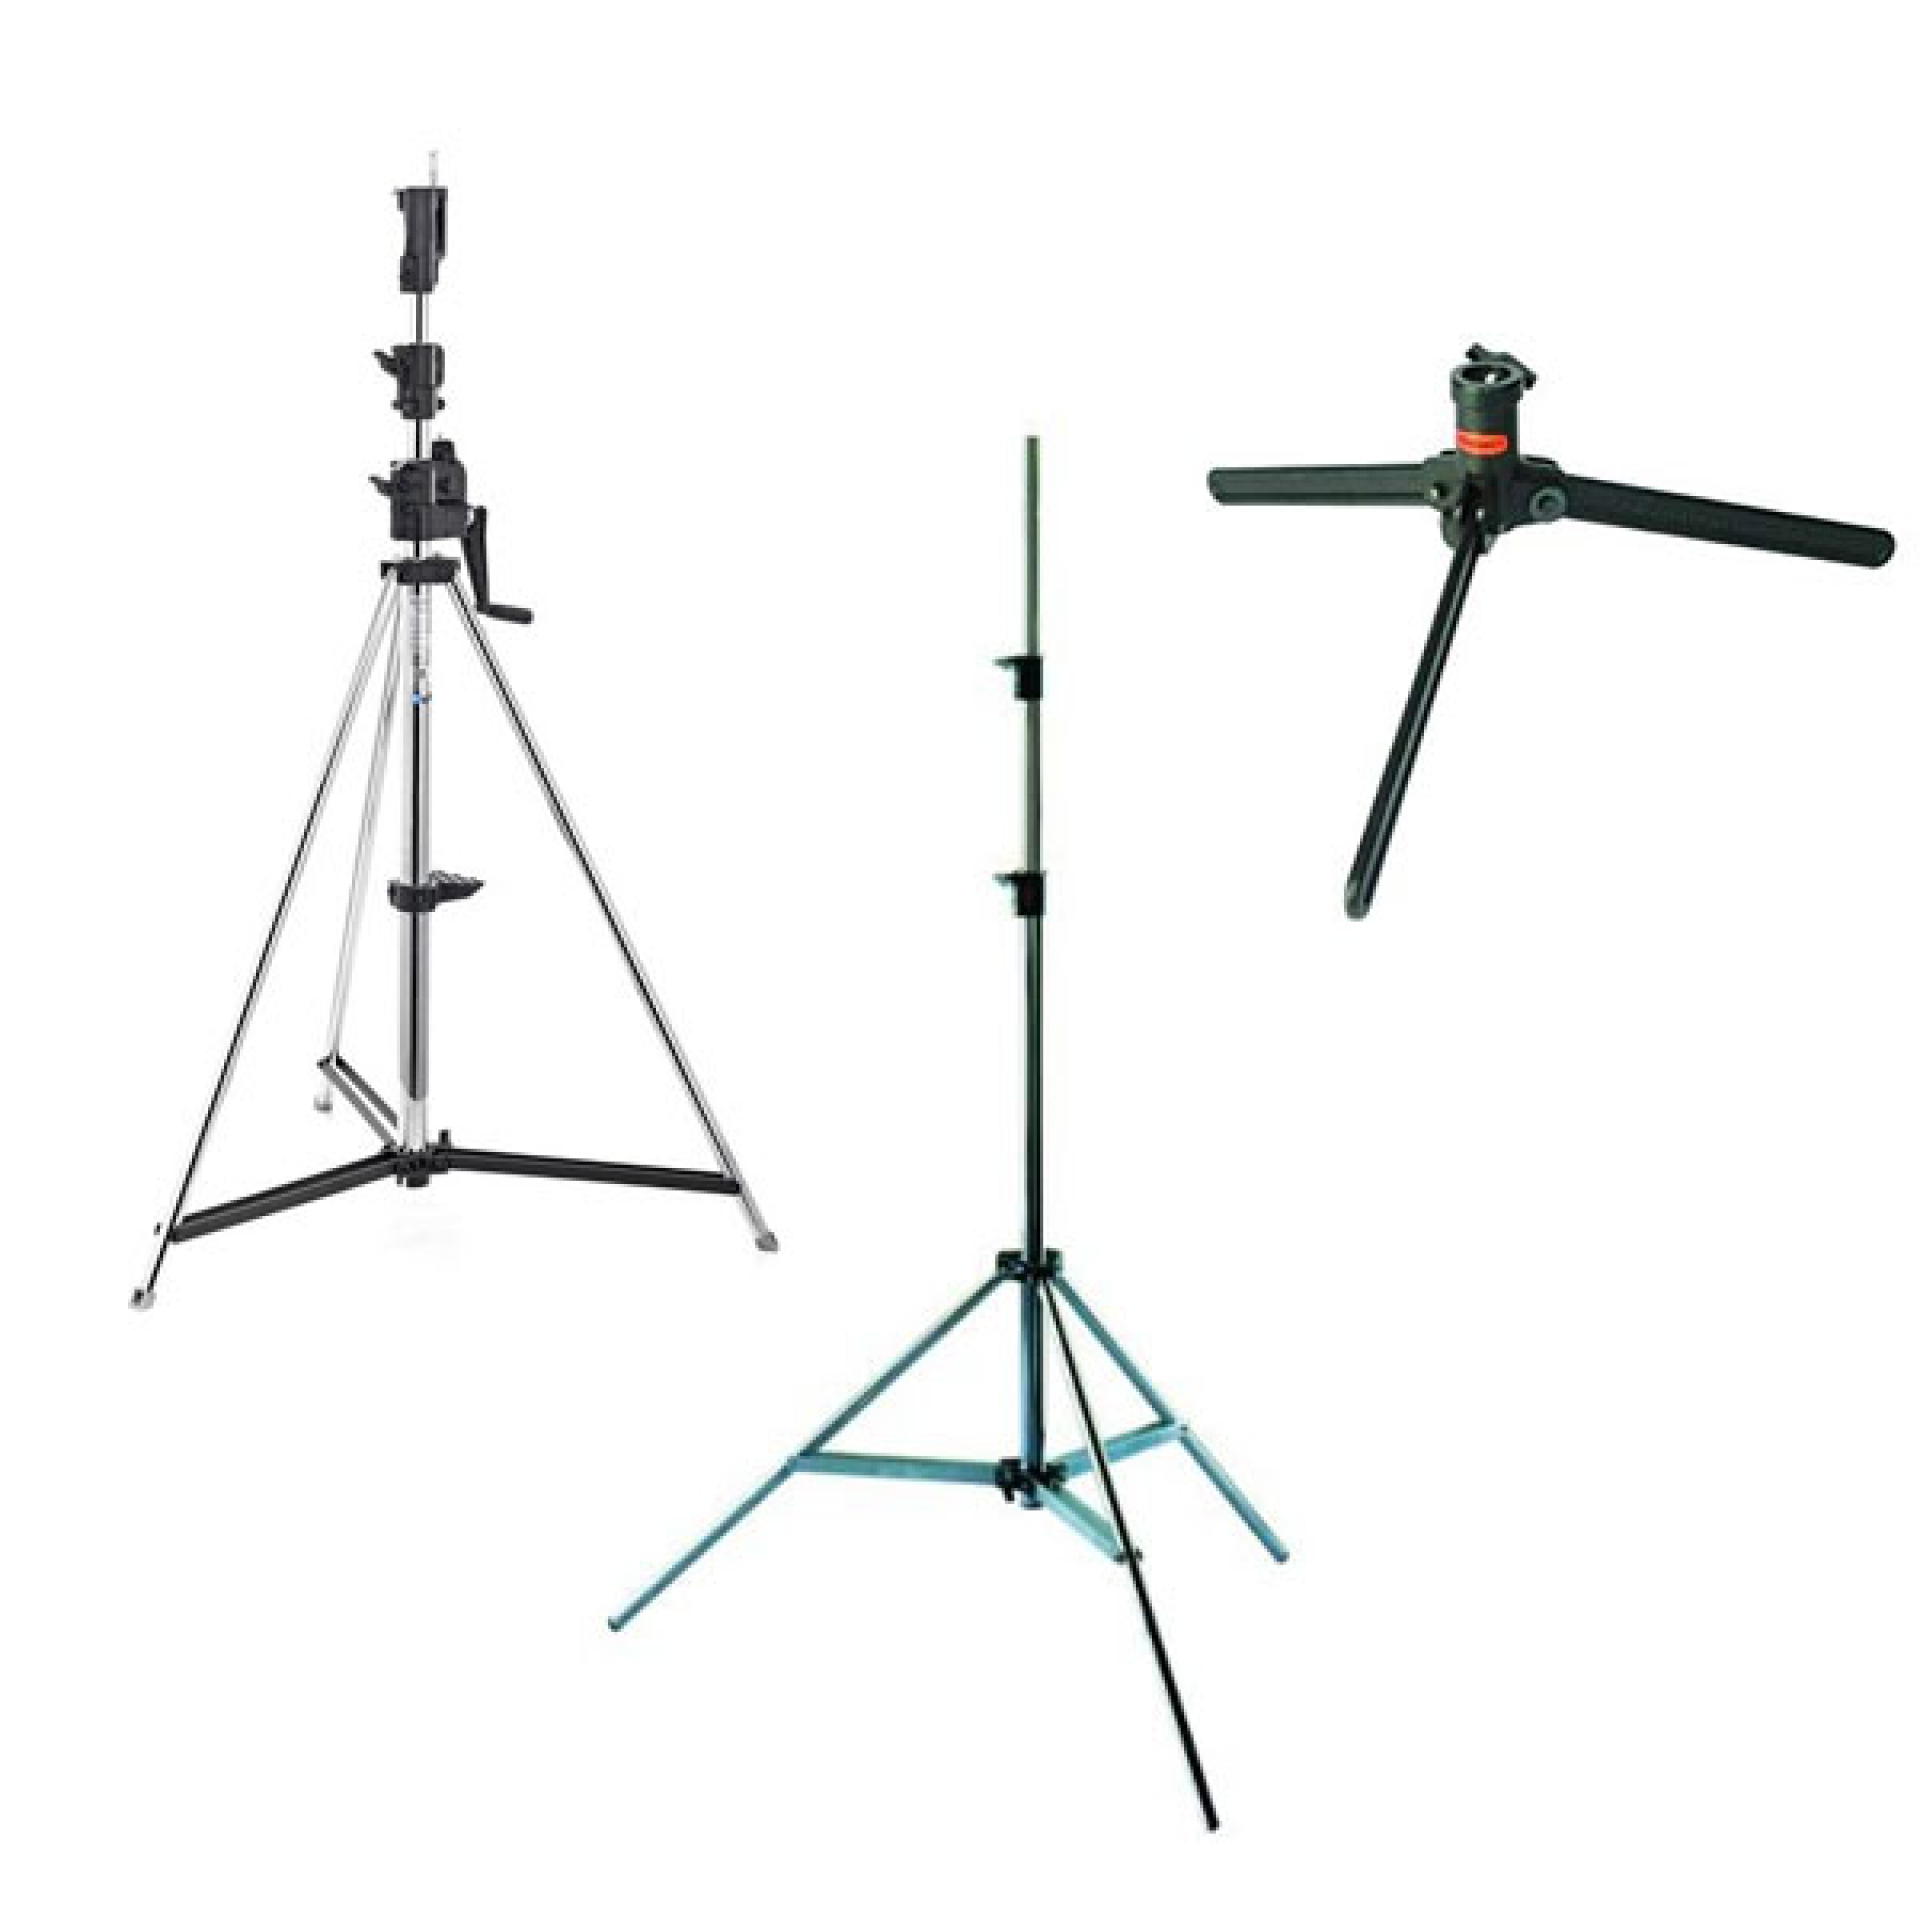 Doughty Stands & Support - Club 35 two stage telescopic, easy life winch stand, nipper stand